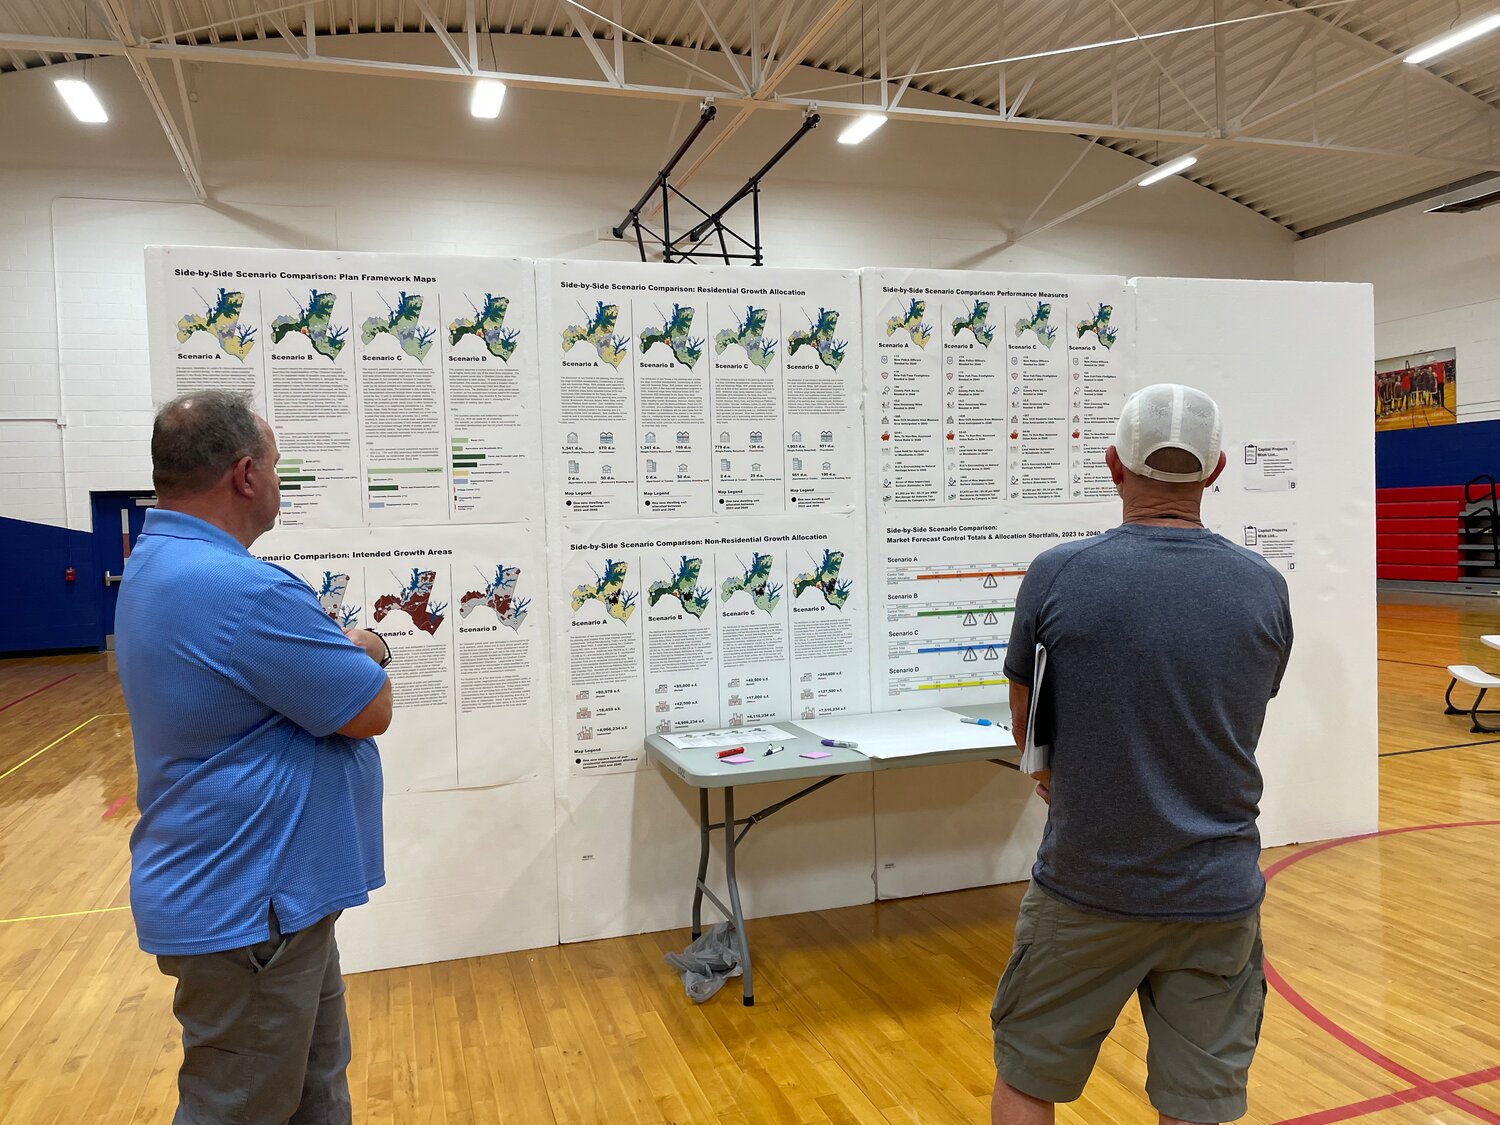 Moncure residents examine different scenario plans for the future of their community at a Plan Moncure meeting last Wednesday.